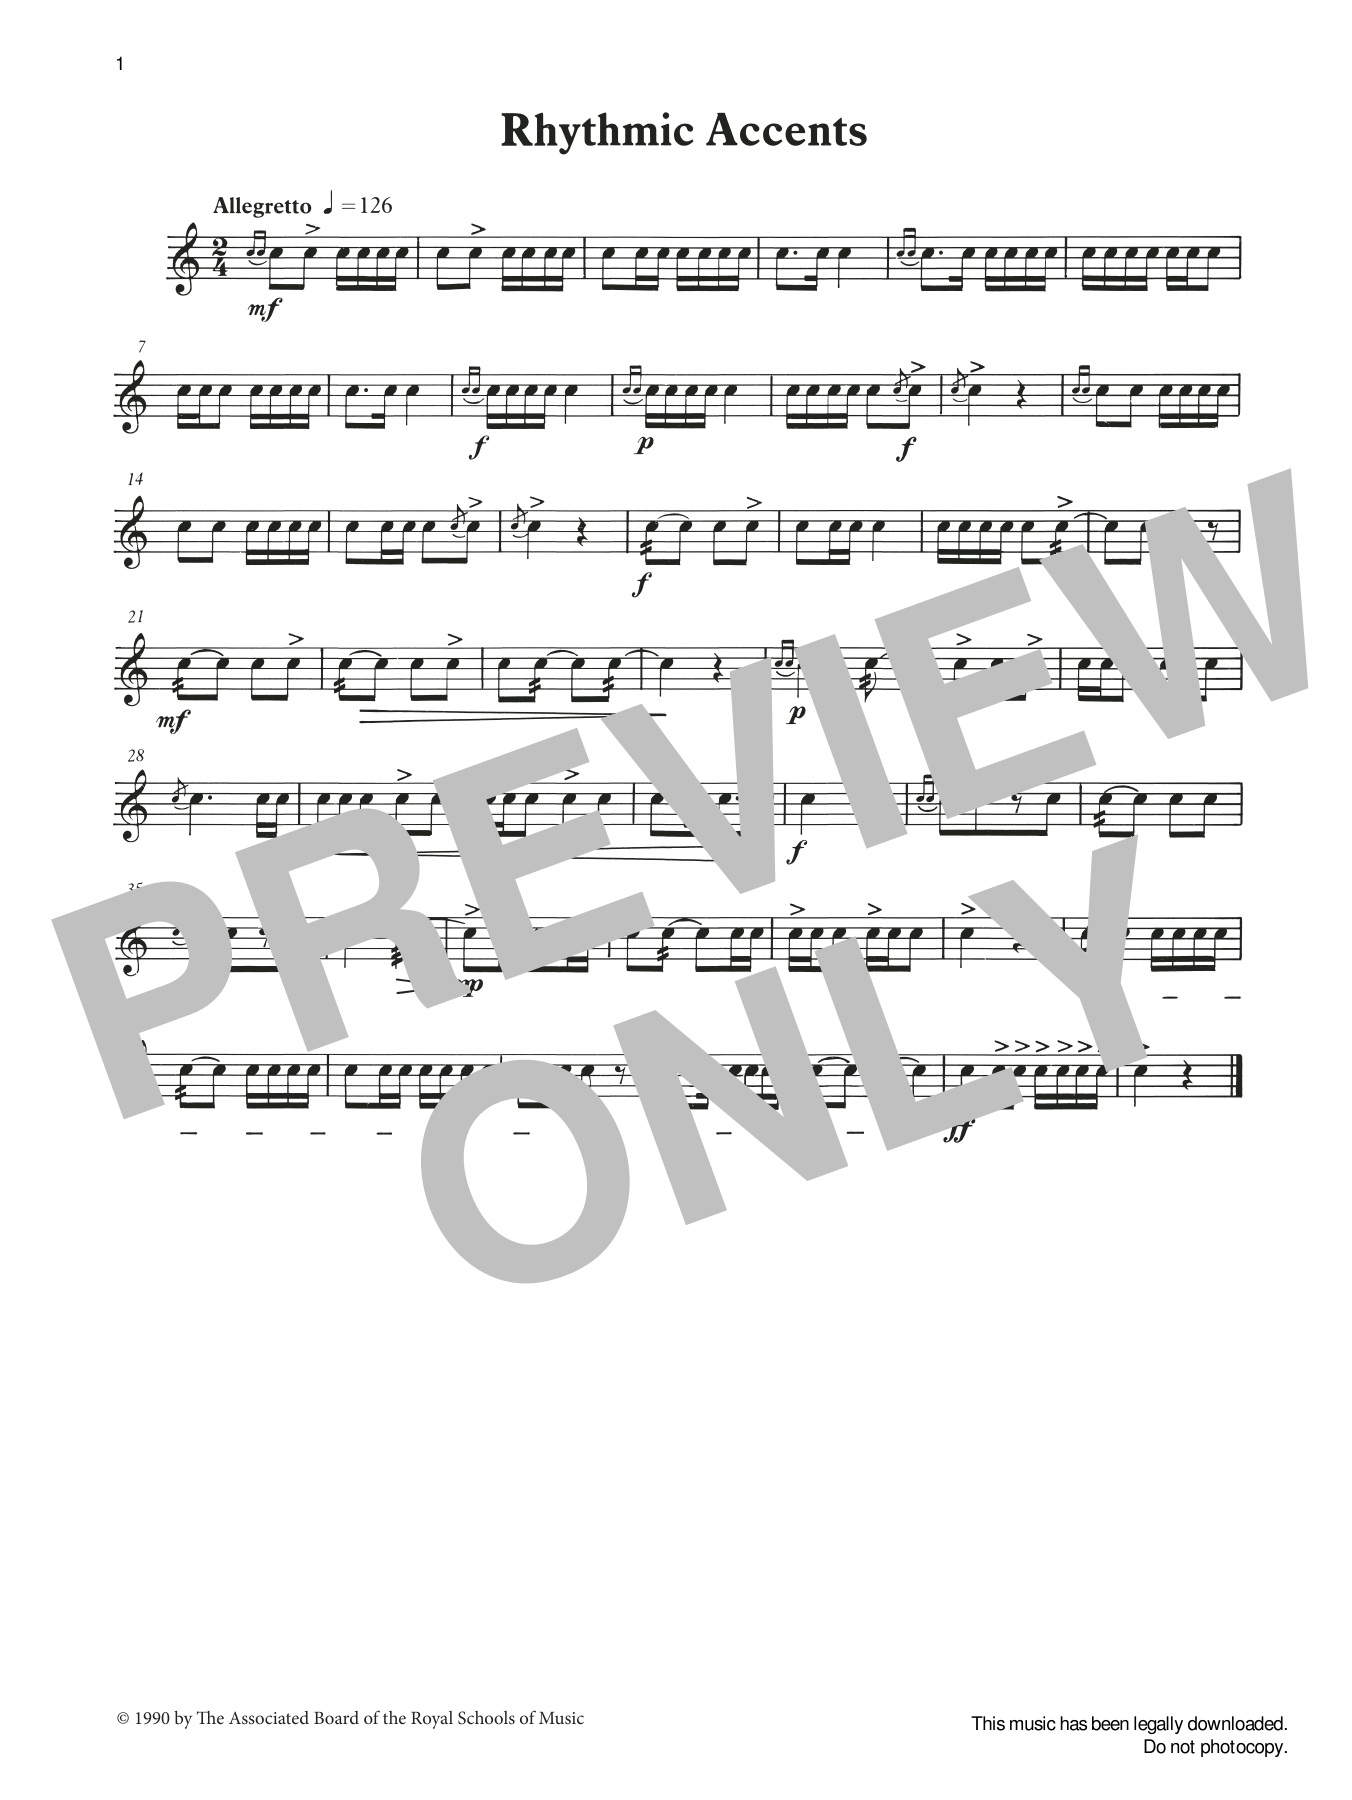 Rhythmic Accents from Graded Music for Snare Drum, Book II (Percussion Solo) von Ian Wright and Kevin Hathaway